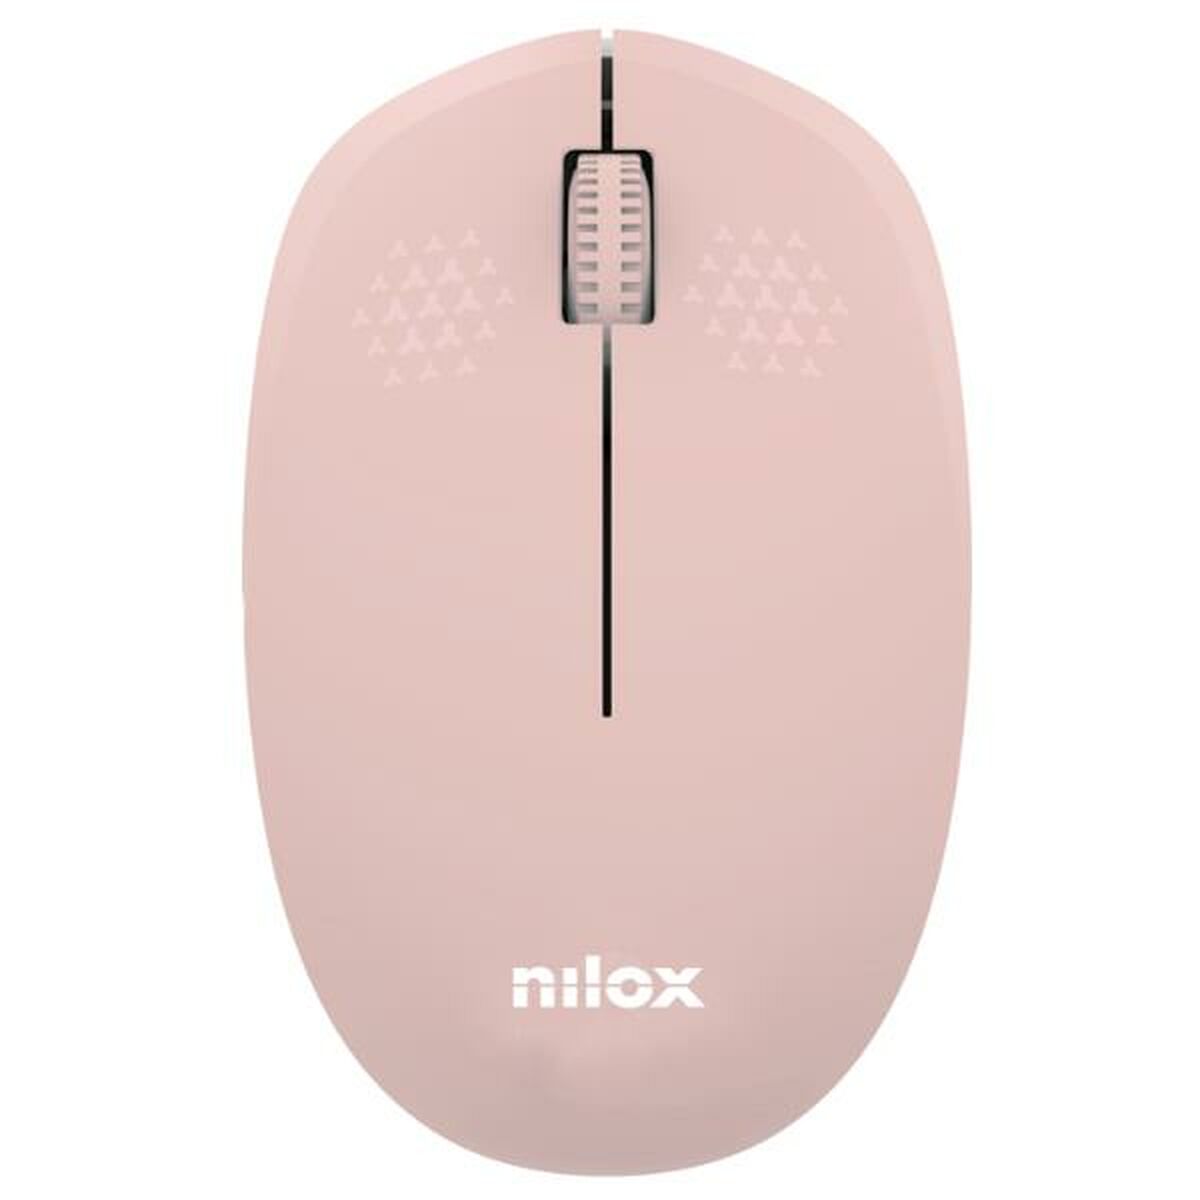 Mouse Nilox NXMOWI4014 Pink, Nilox, Computing, Accessories, mouse-nilox-nxmowi4014-pink, Brand_Nilox, category-reference-2609, category-reference-2642, category-reference-2656, category-reference-t-19685, category-reference-t-19908, category-reference-t-21353, category-reference-t-25626, computers / peripherals, Condition_NEW, office, Price_20 - 50, Teleworking, RiotNook